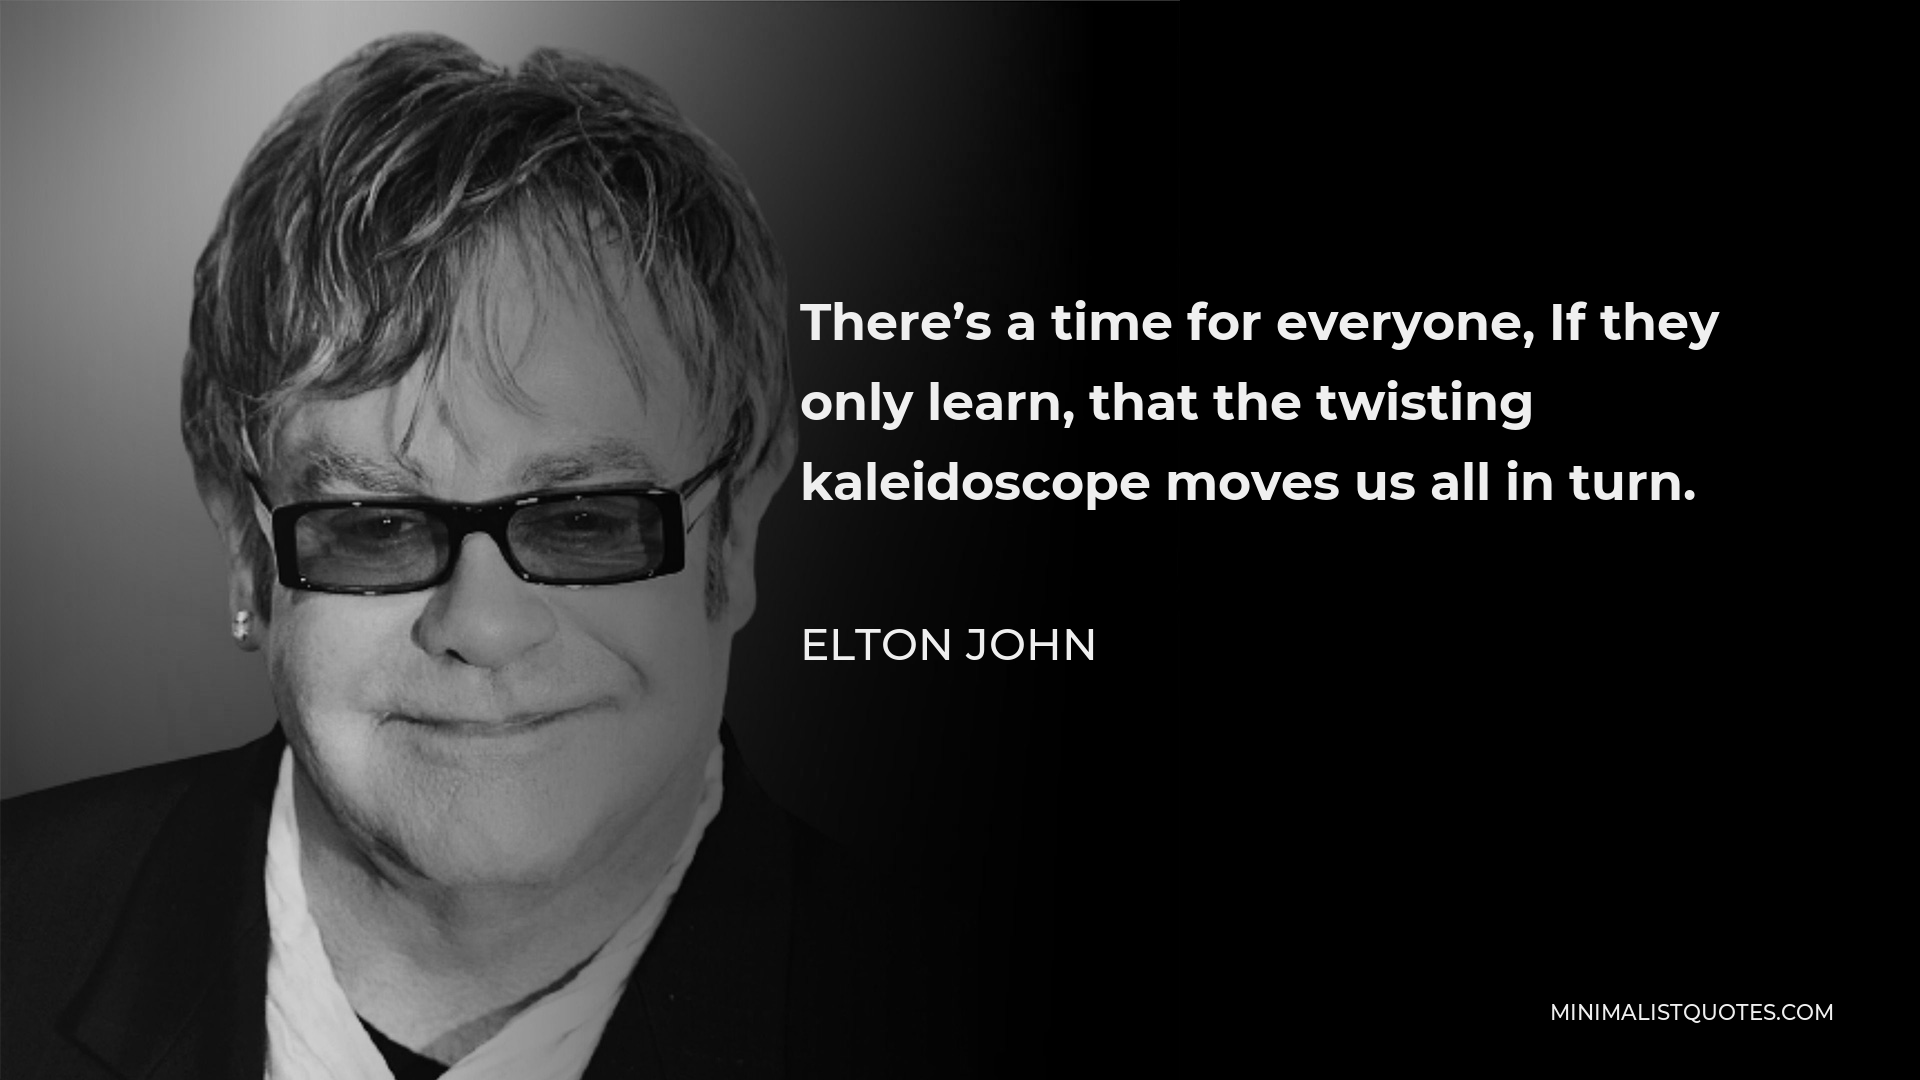 Elton John Quote - There’s a time for everyone, If they only learn, that the twisting kaleidoscope moves us all in turn.